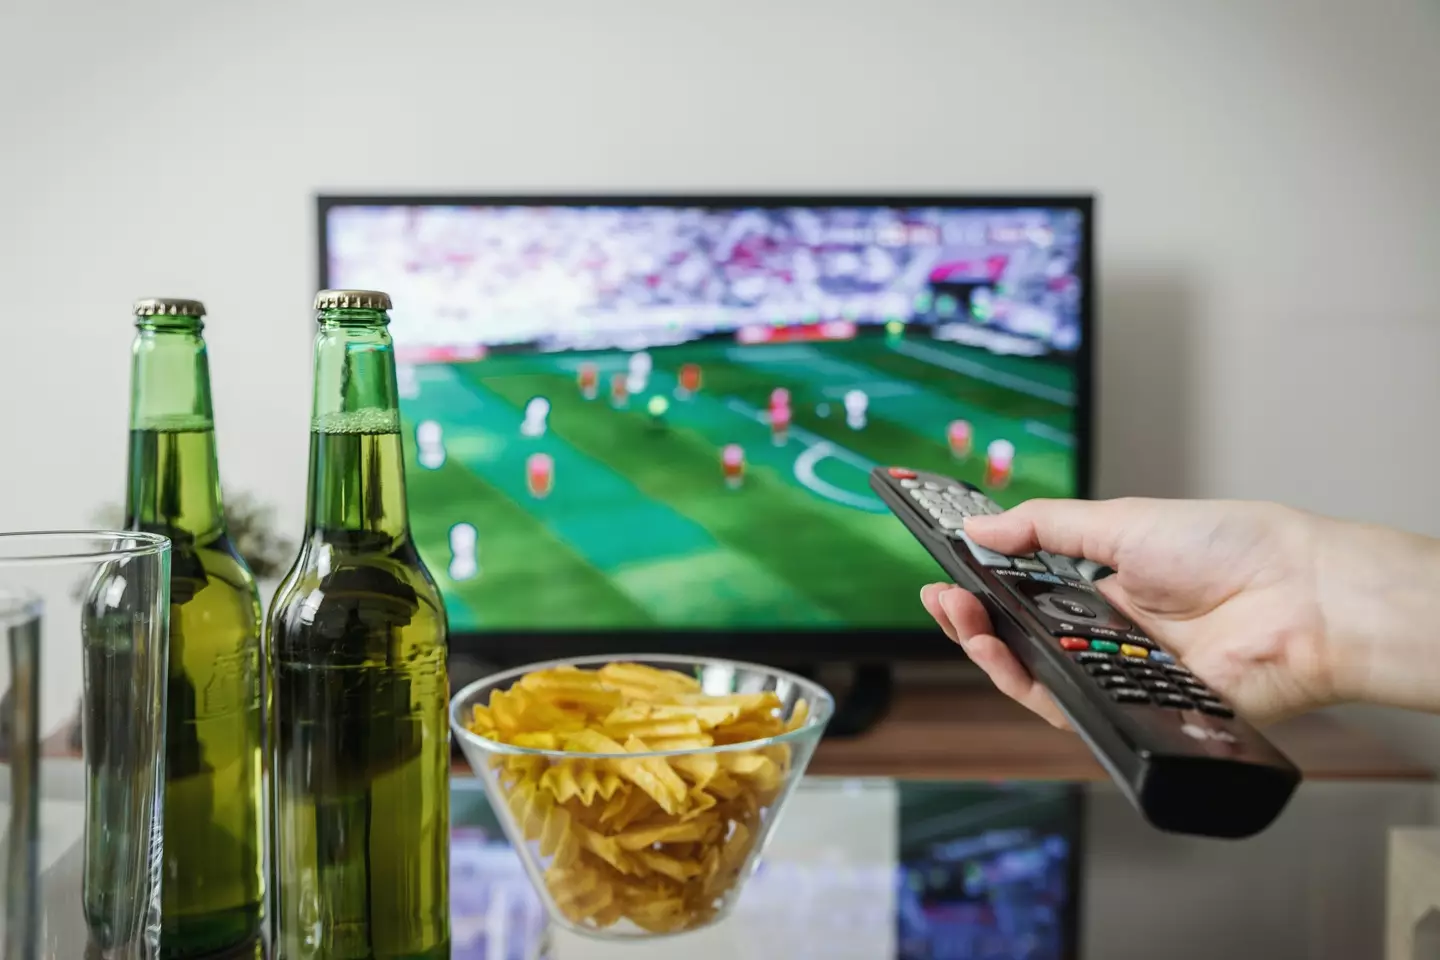 Premier League fans have only been able to tune in to watch football on Christmas Eve once.